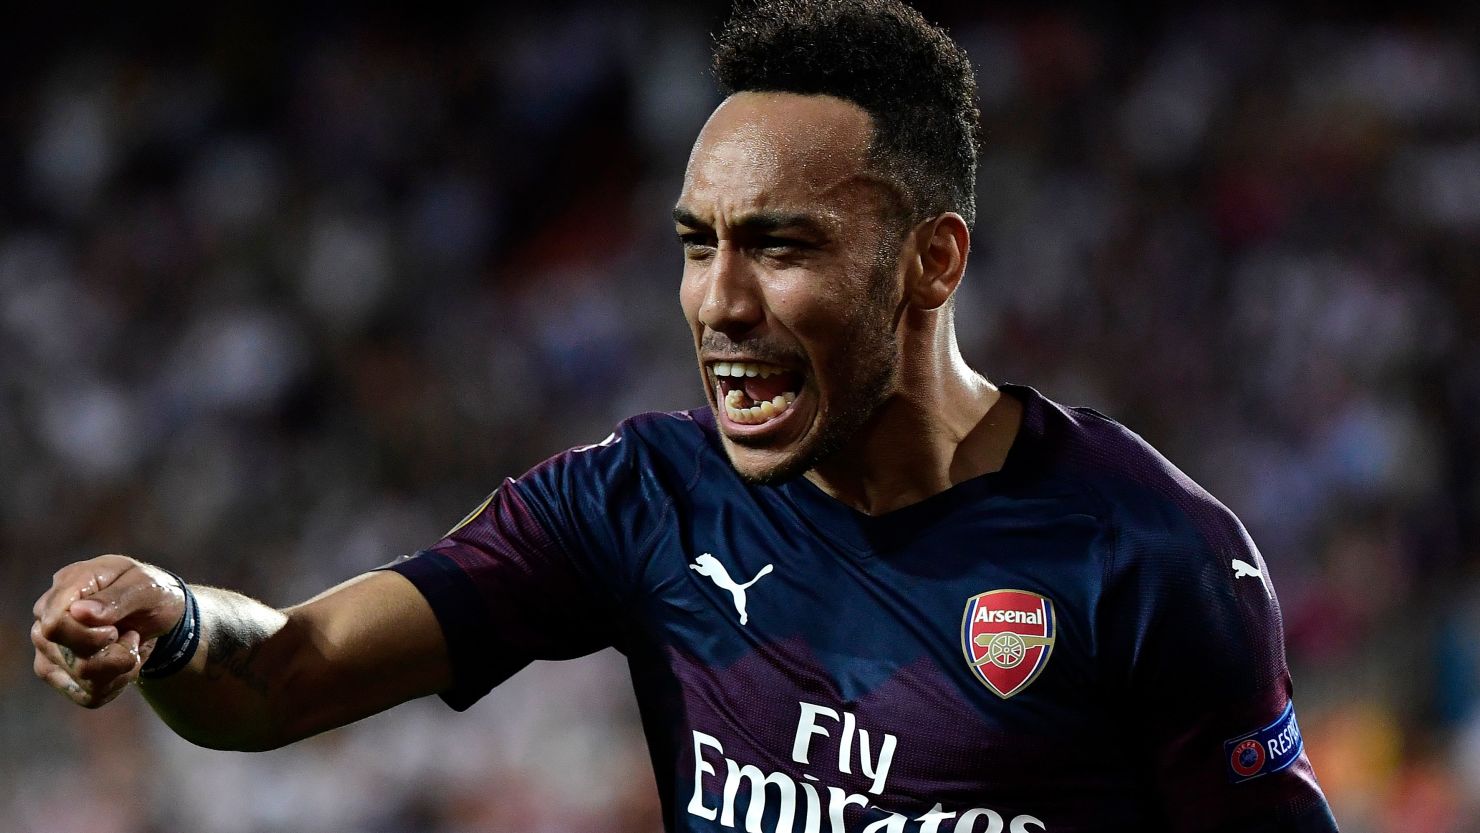 Pierre-Emerick Aubameyang scored a hat-trick as Arsenal claimed victory in Valencia.